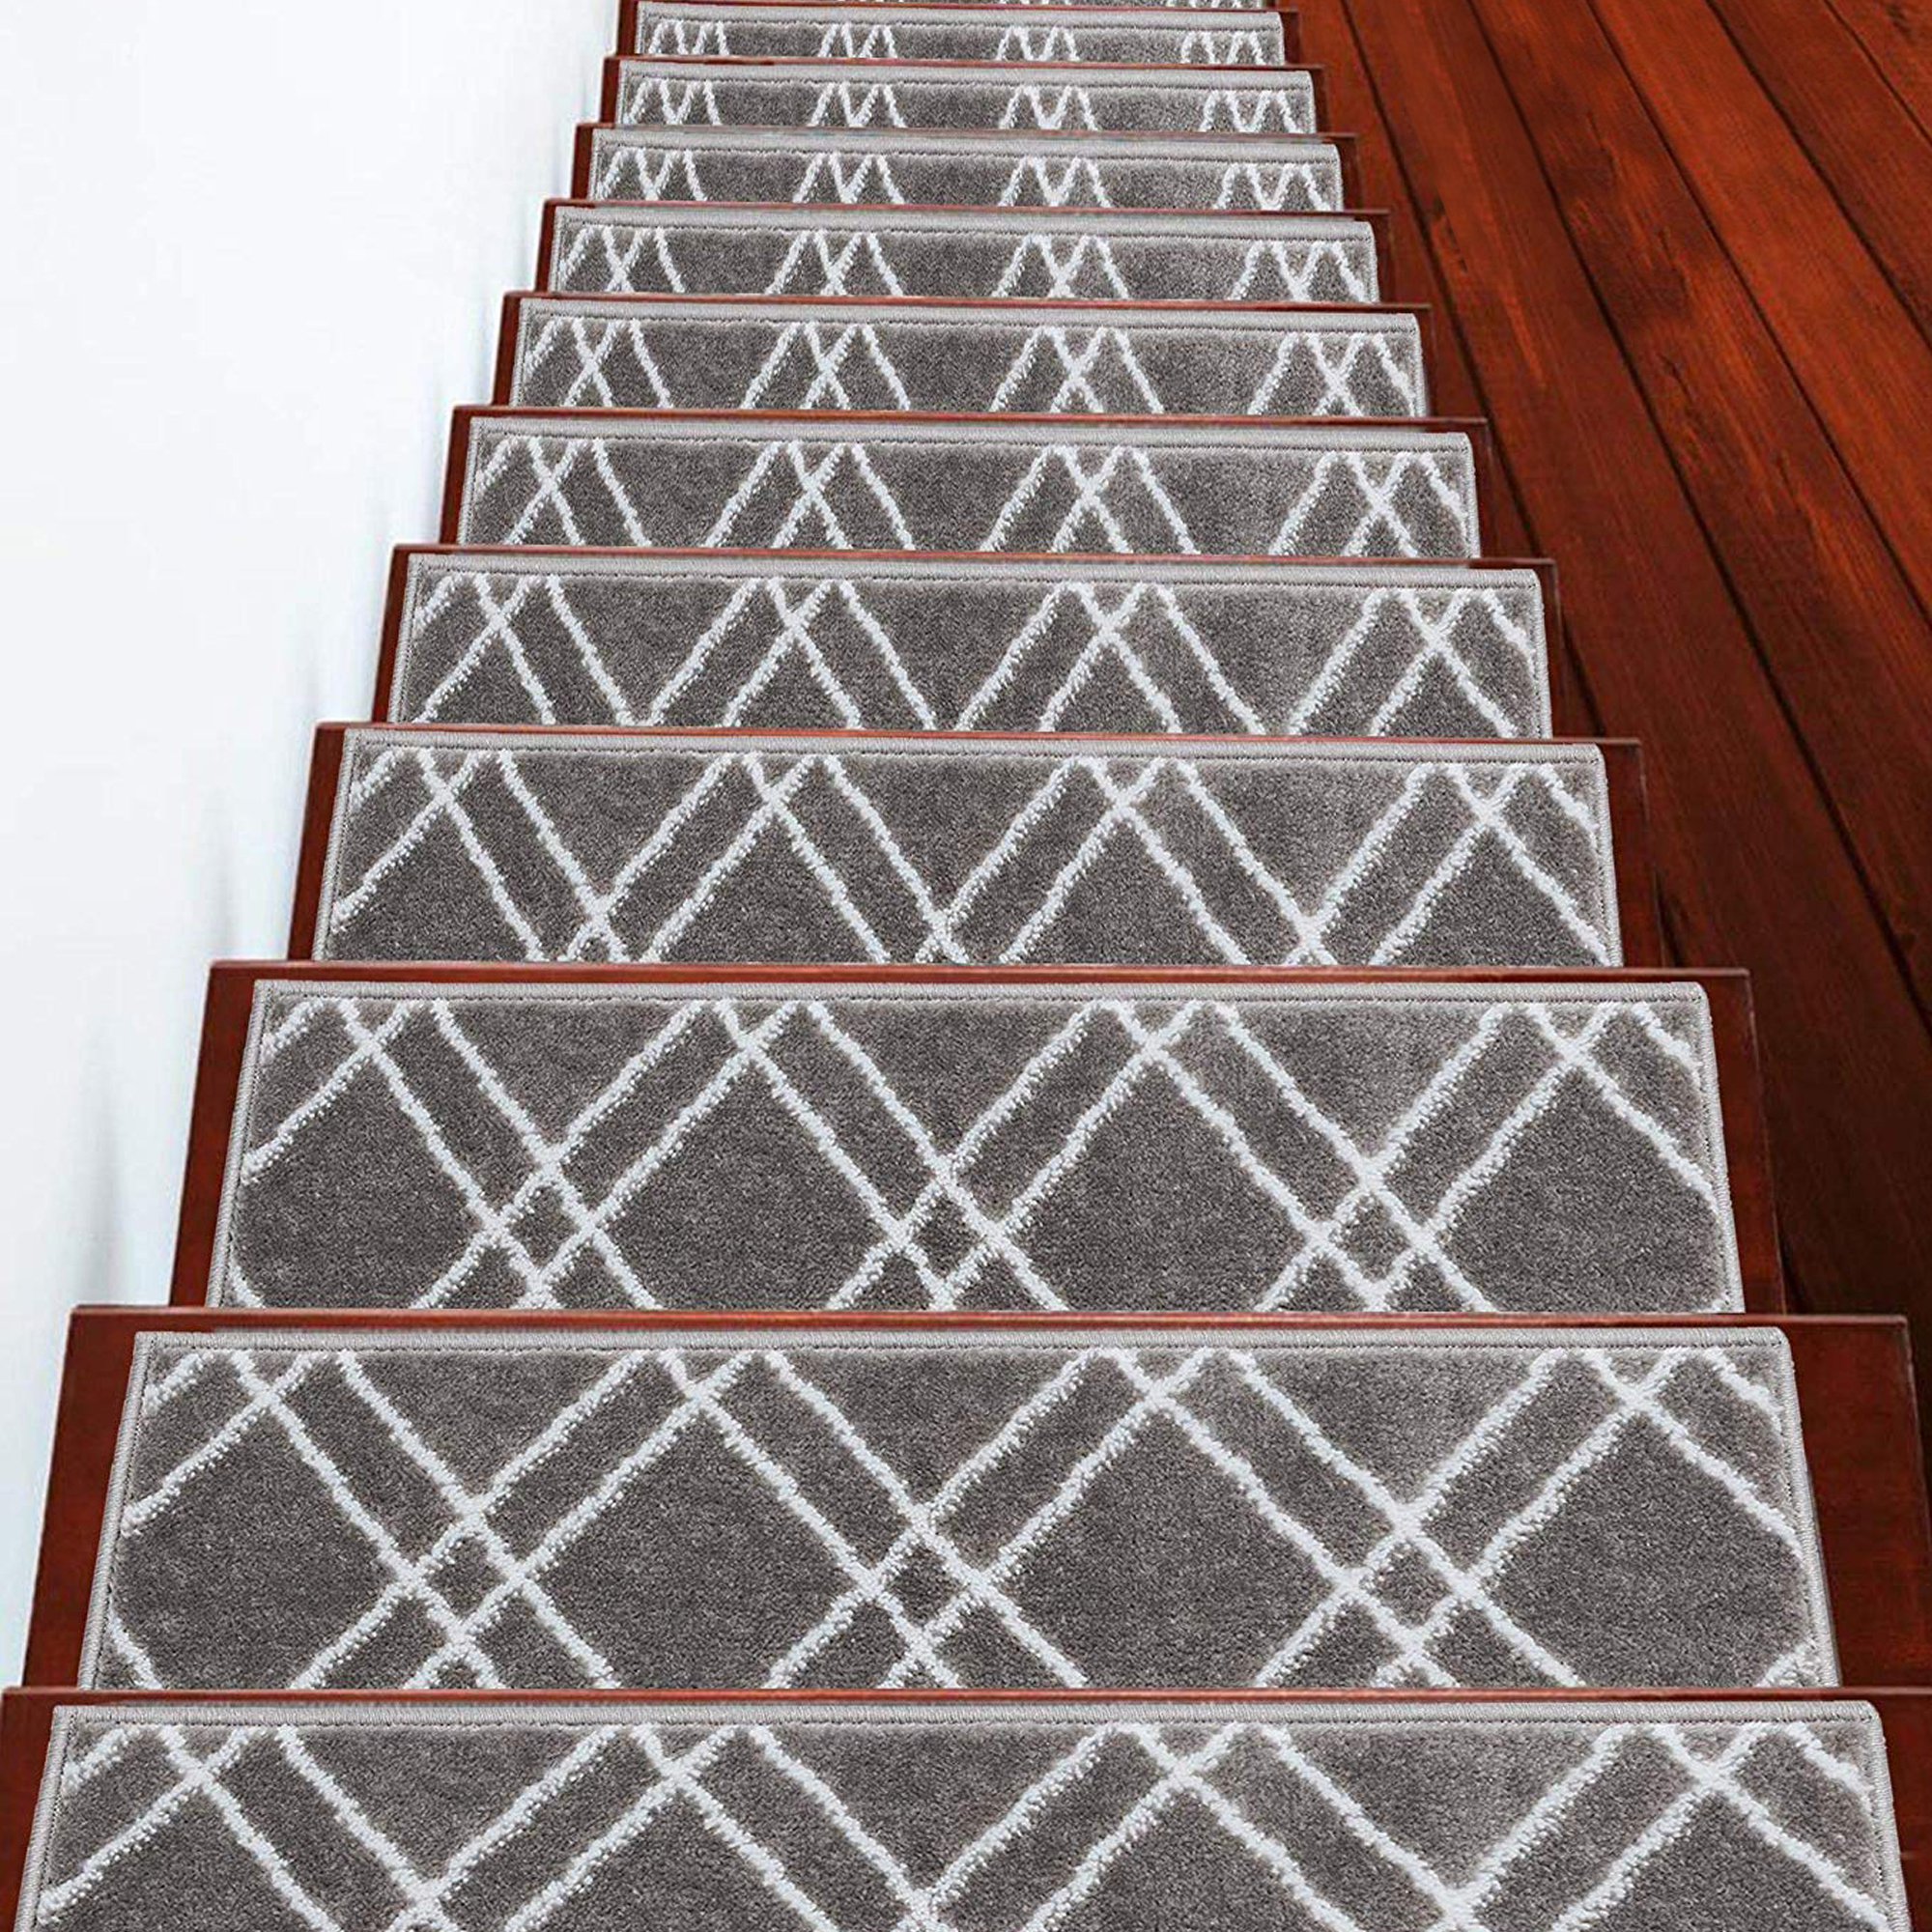 Stair Treads Vintage Collection Contemporary, Cozy, Vibrant and Soft Stair Treads, 9'' x 28'', Gray & White, Pack of 13 [100% Polypropylene] - image 1 of 6